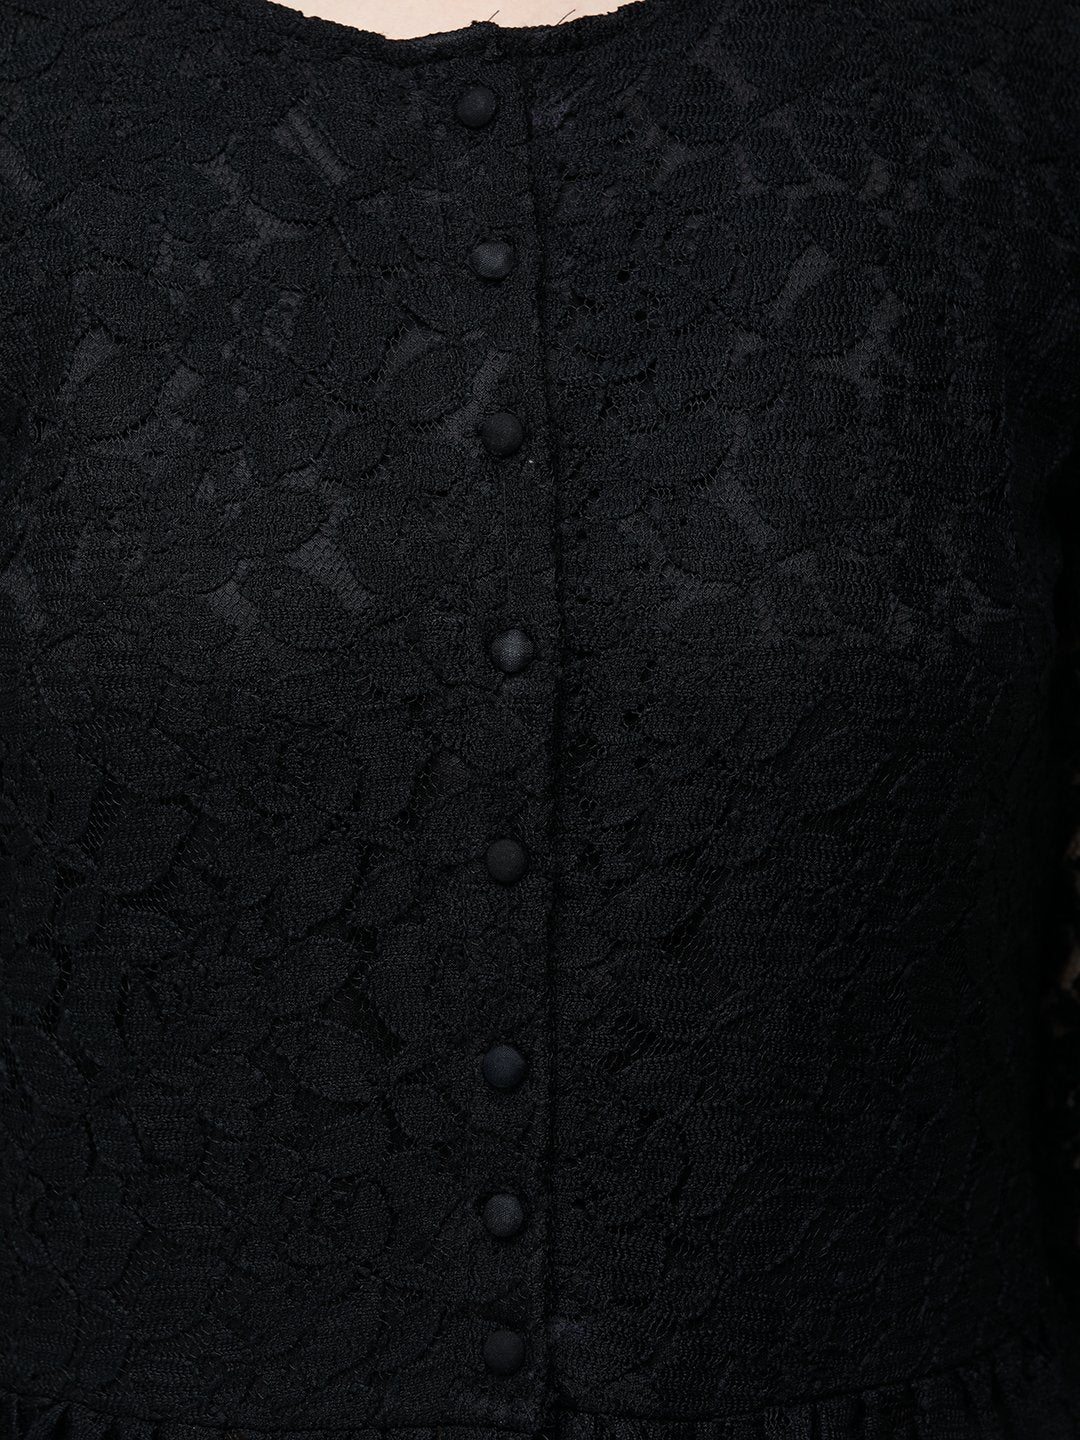 Cation Black Lace Tunic